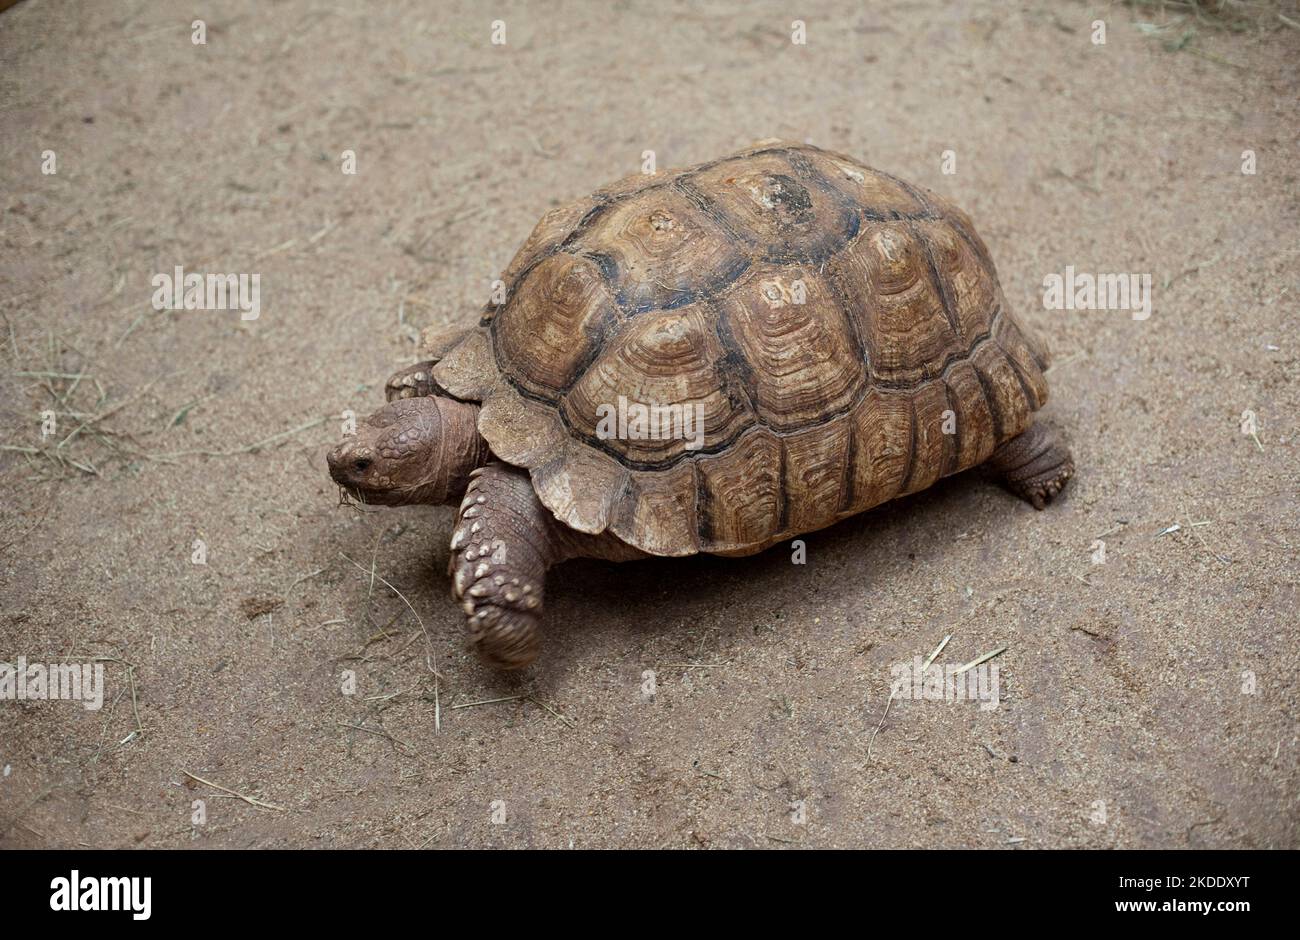 High angle view of an adult tortoise walking on dry ground with its head extended and showing its club-like legs and feet Stock Photo